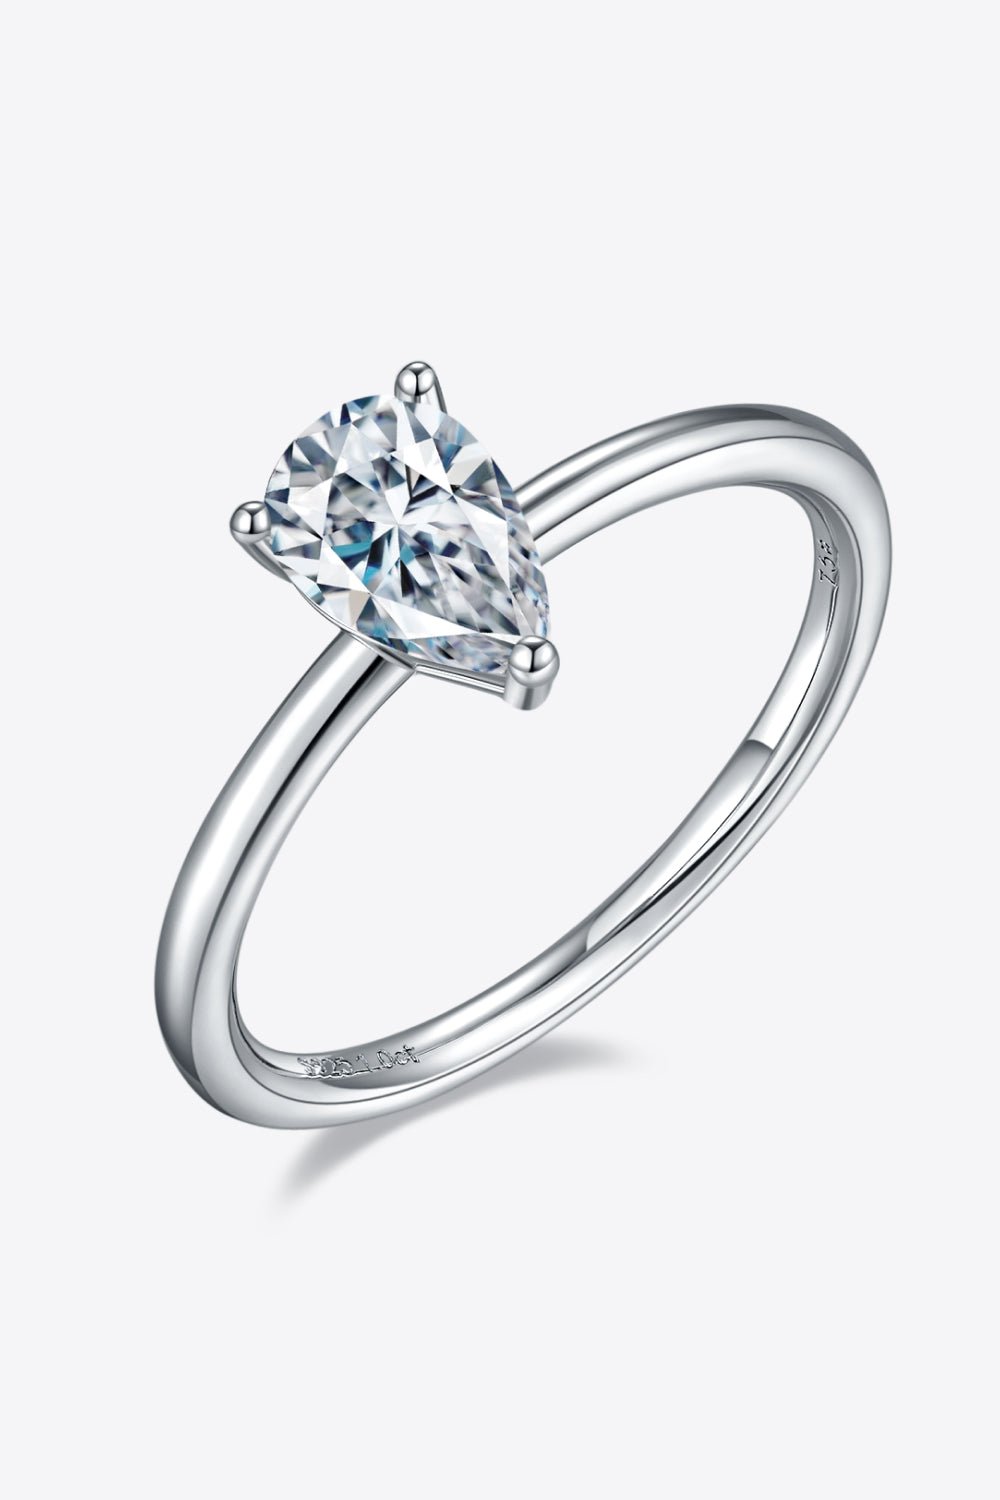 1 Carat Moissanite 925 Sterling Silver Solitaire Ring - Guy Christopher 